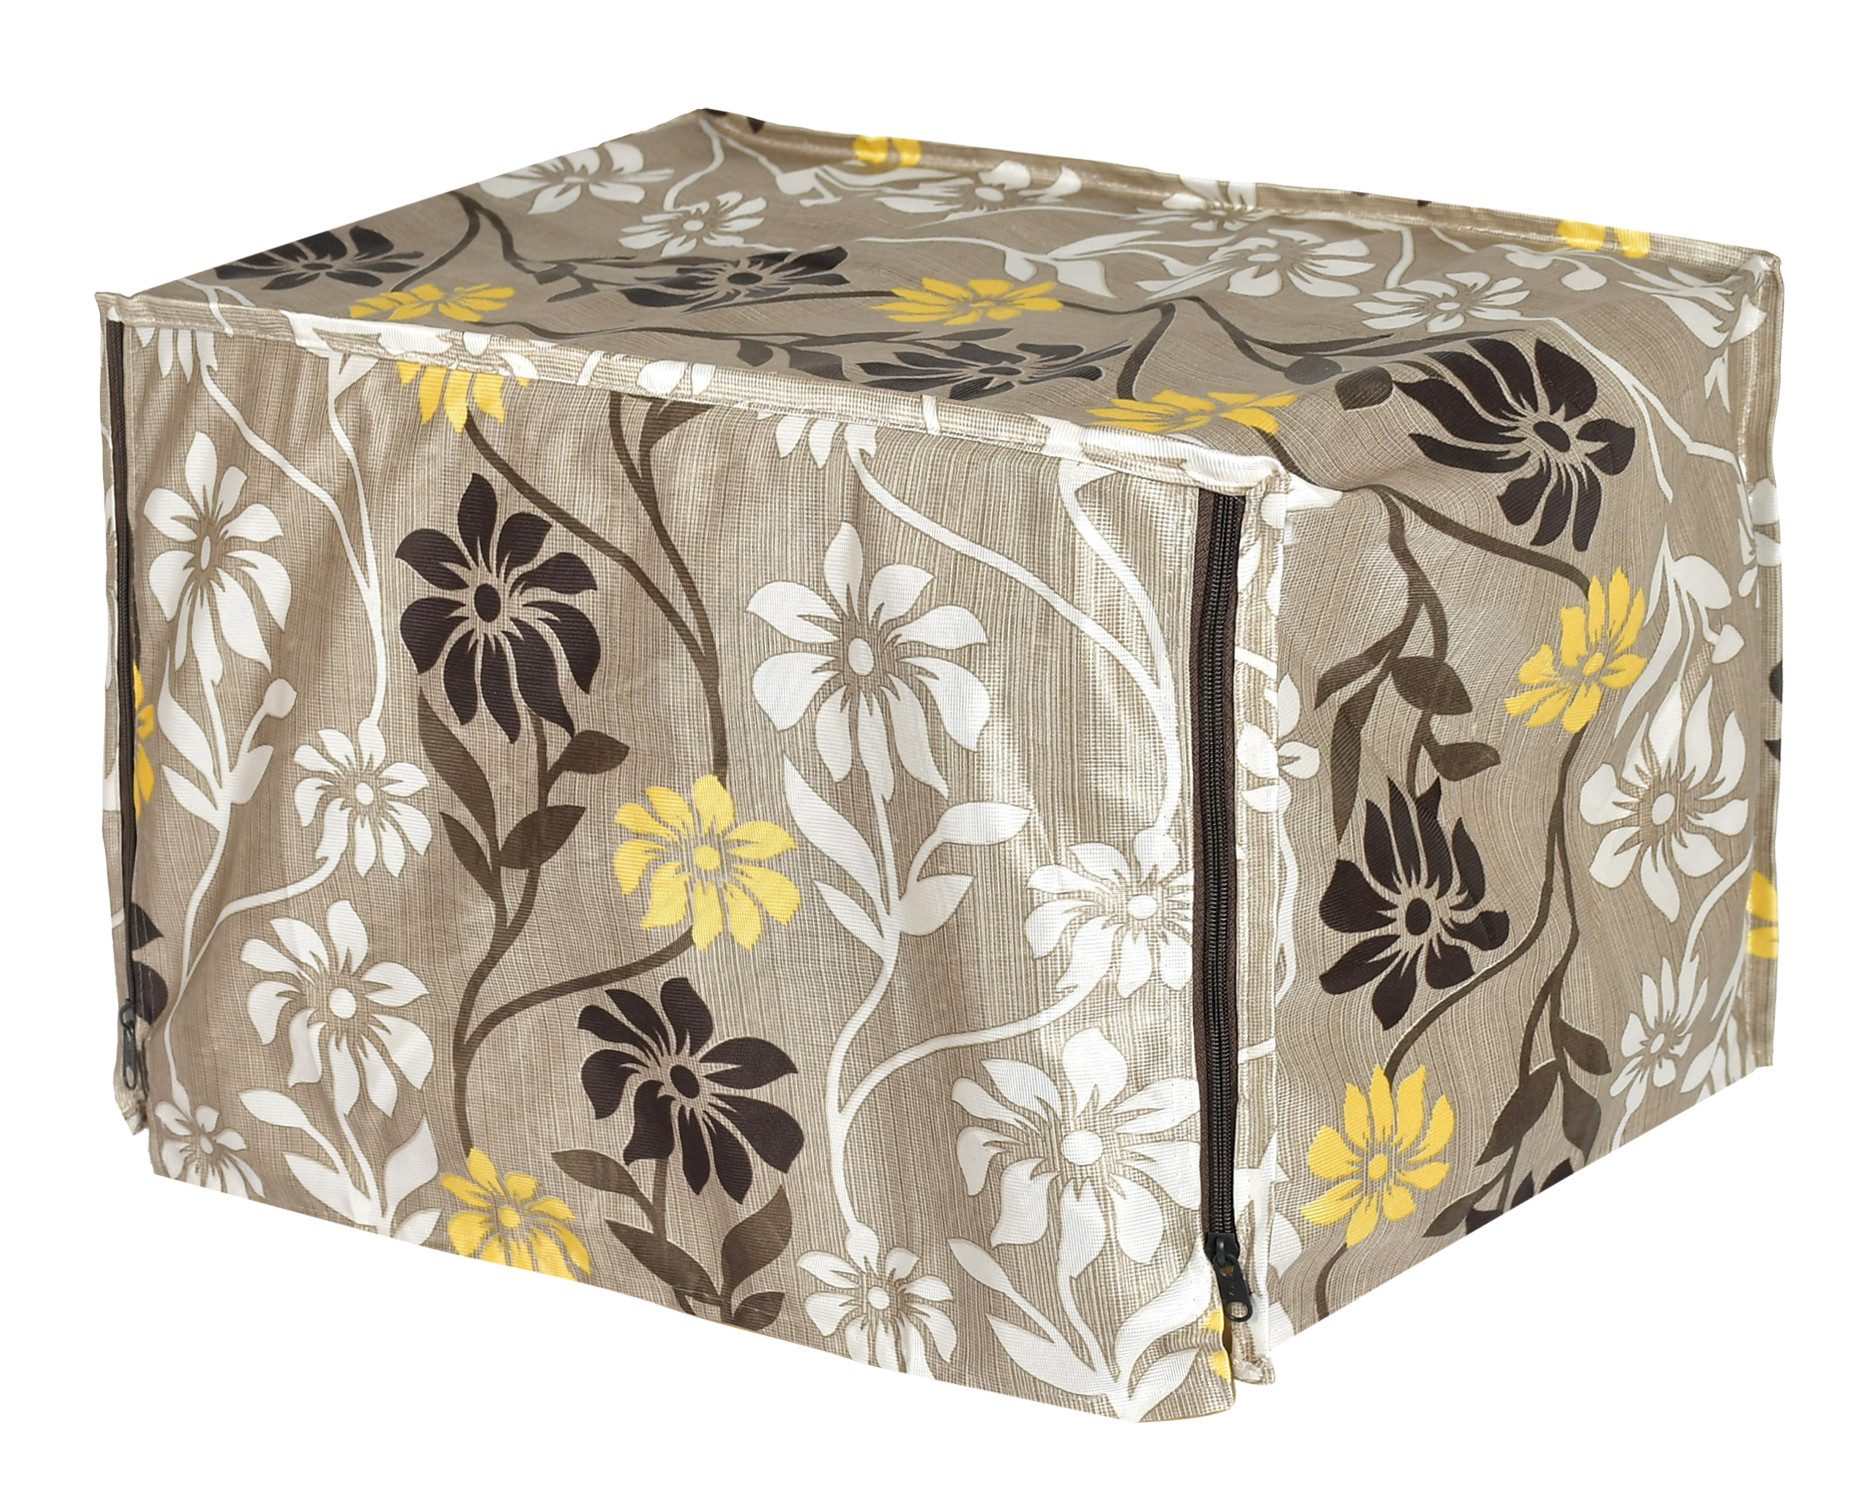 Kuber Industries Polyster Flower Printed Microwave Oven Cover,20 Ltr. (Brown)-HS43KUBMART25913